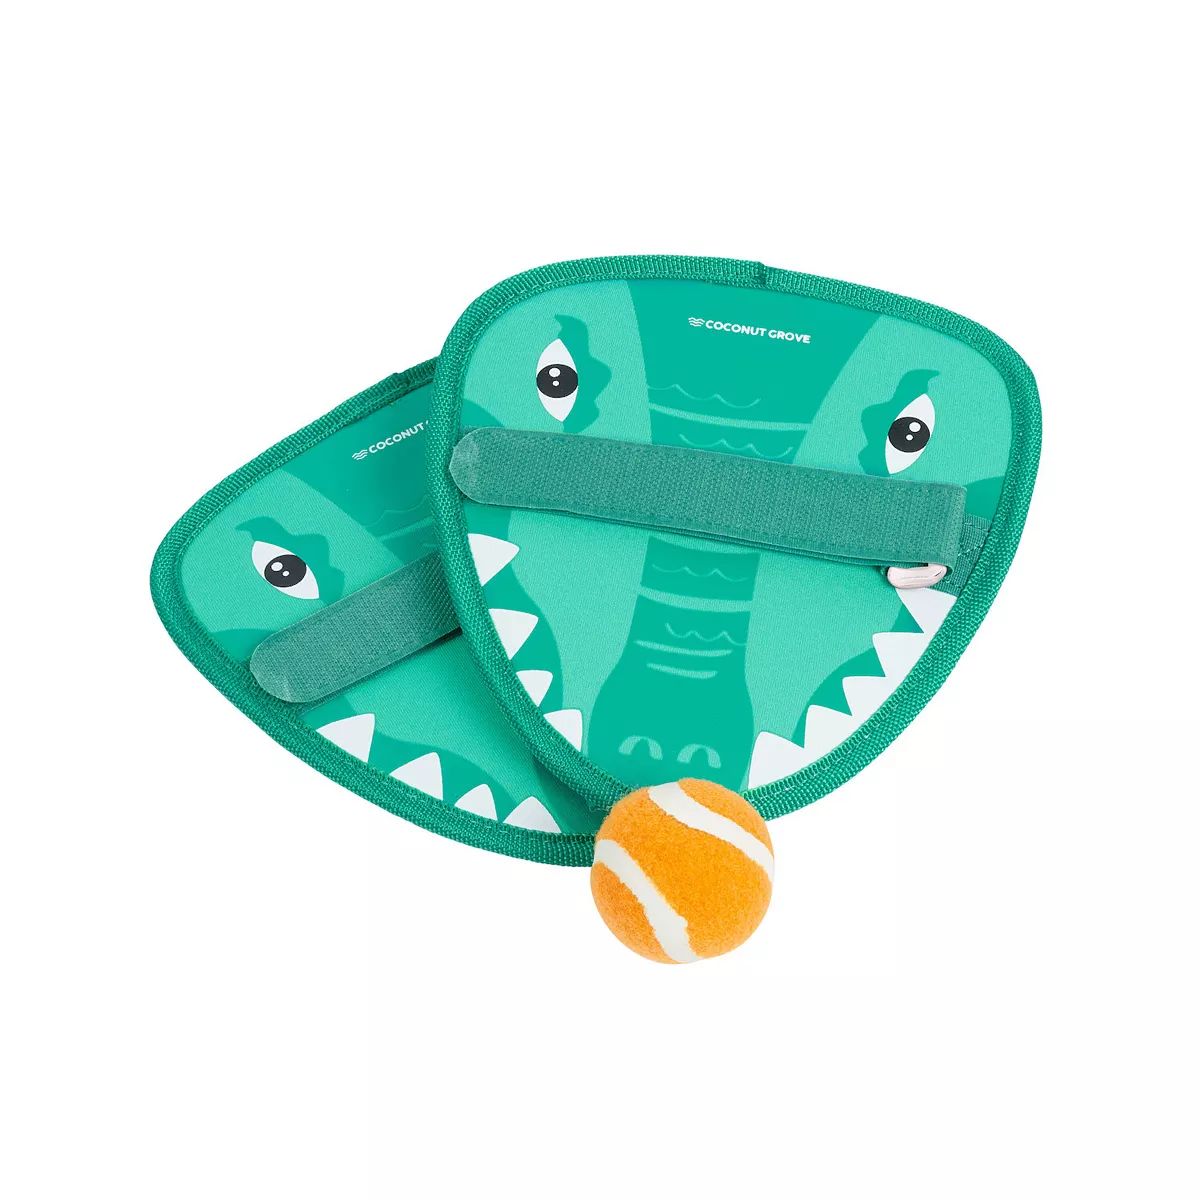 Coconut Grove Catch Game - Fang the Croc | Kohl's